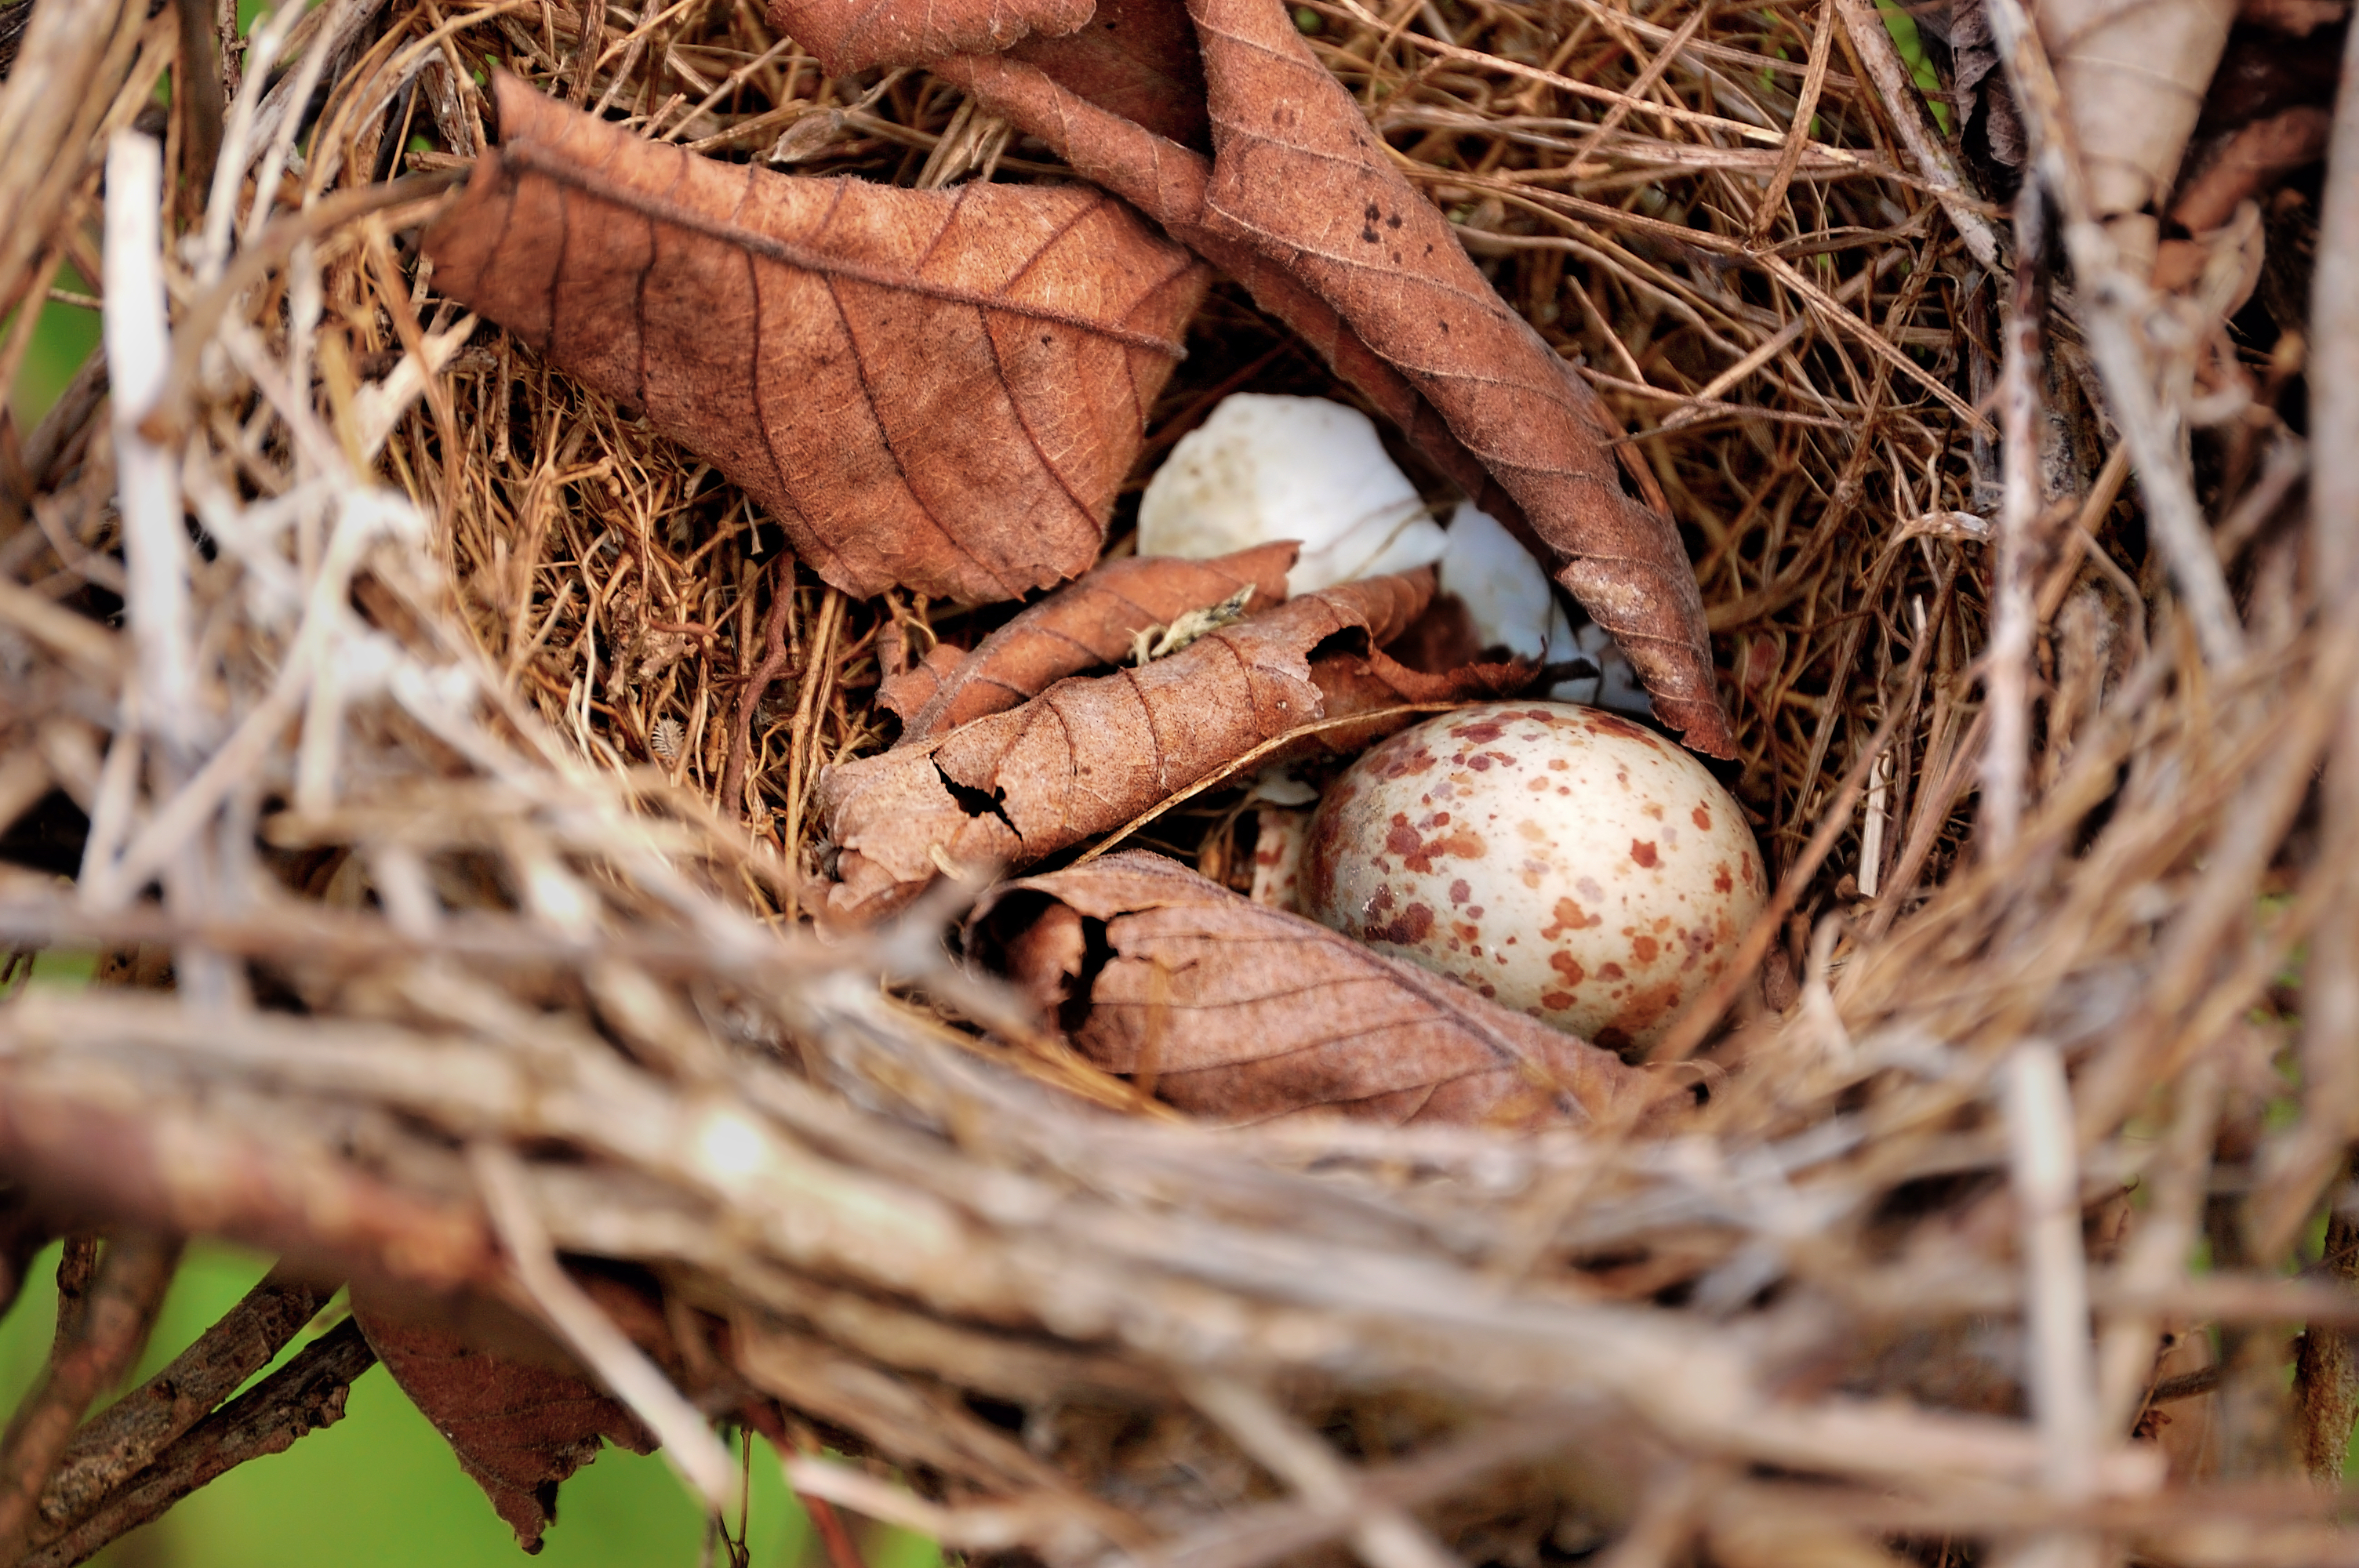 A speckled egg and leaves inside of a bird's nest